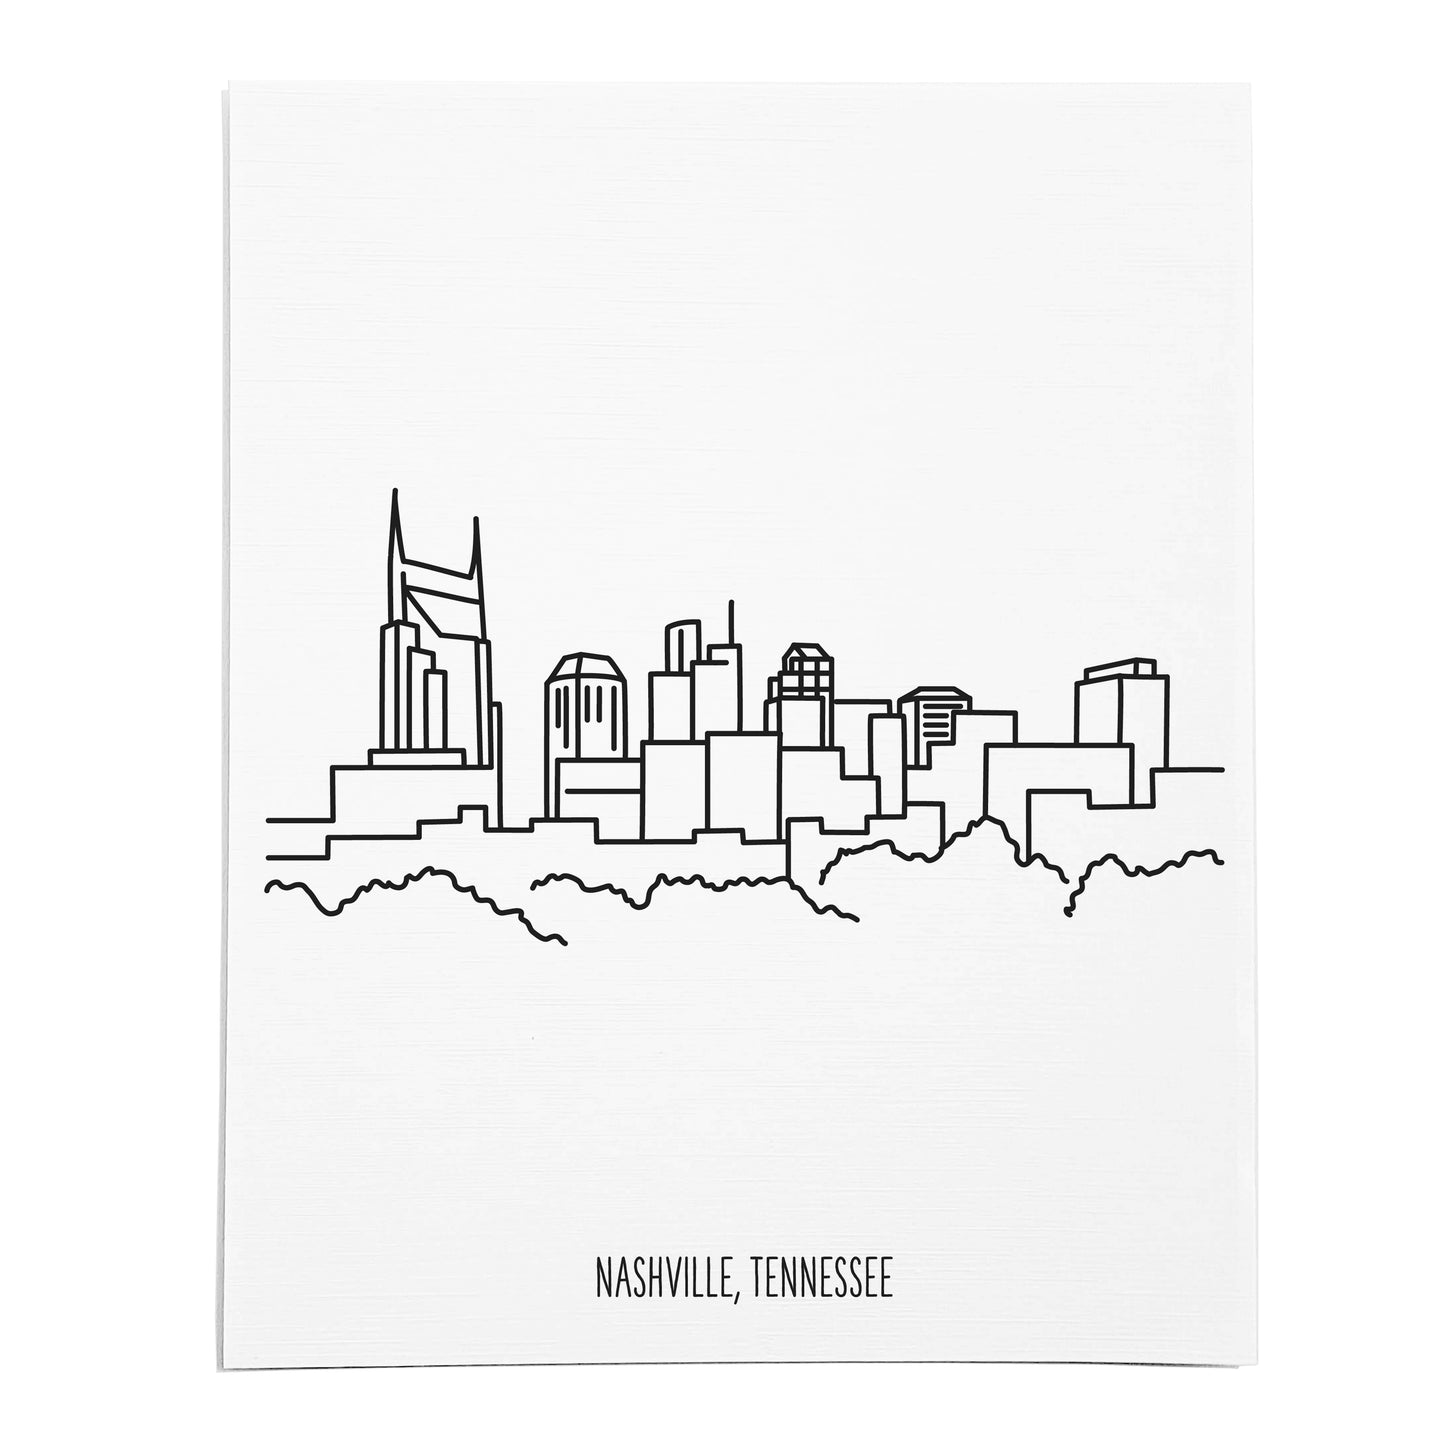 An art print featuring a line drawing of the Nashville Skyline on white linen paper